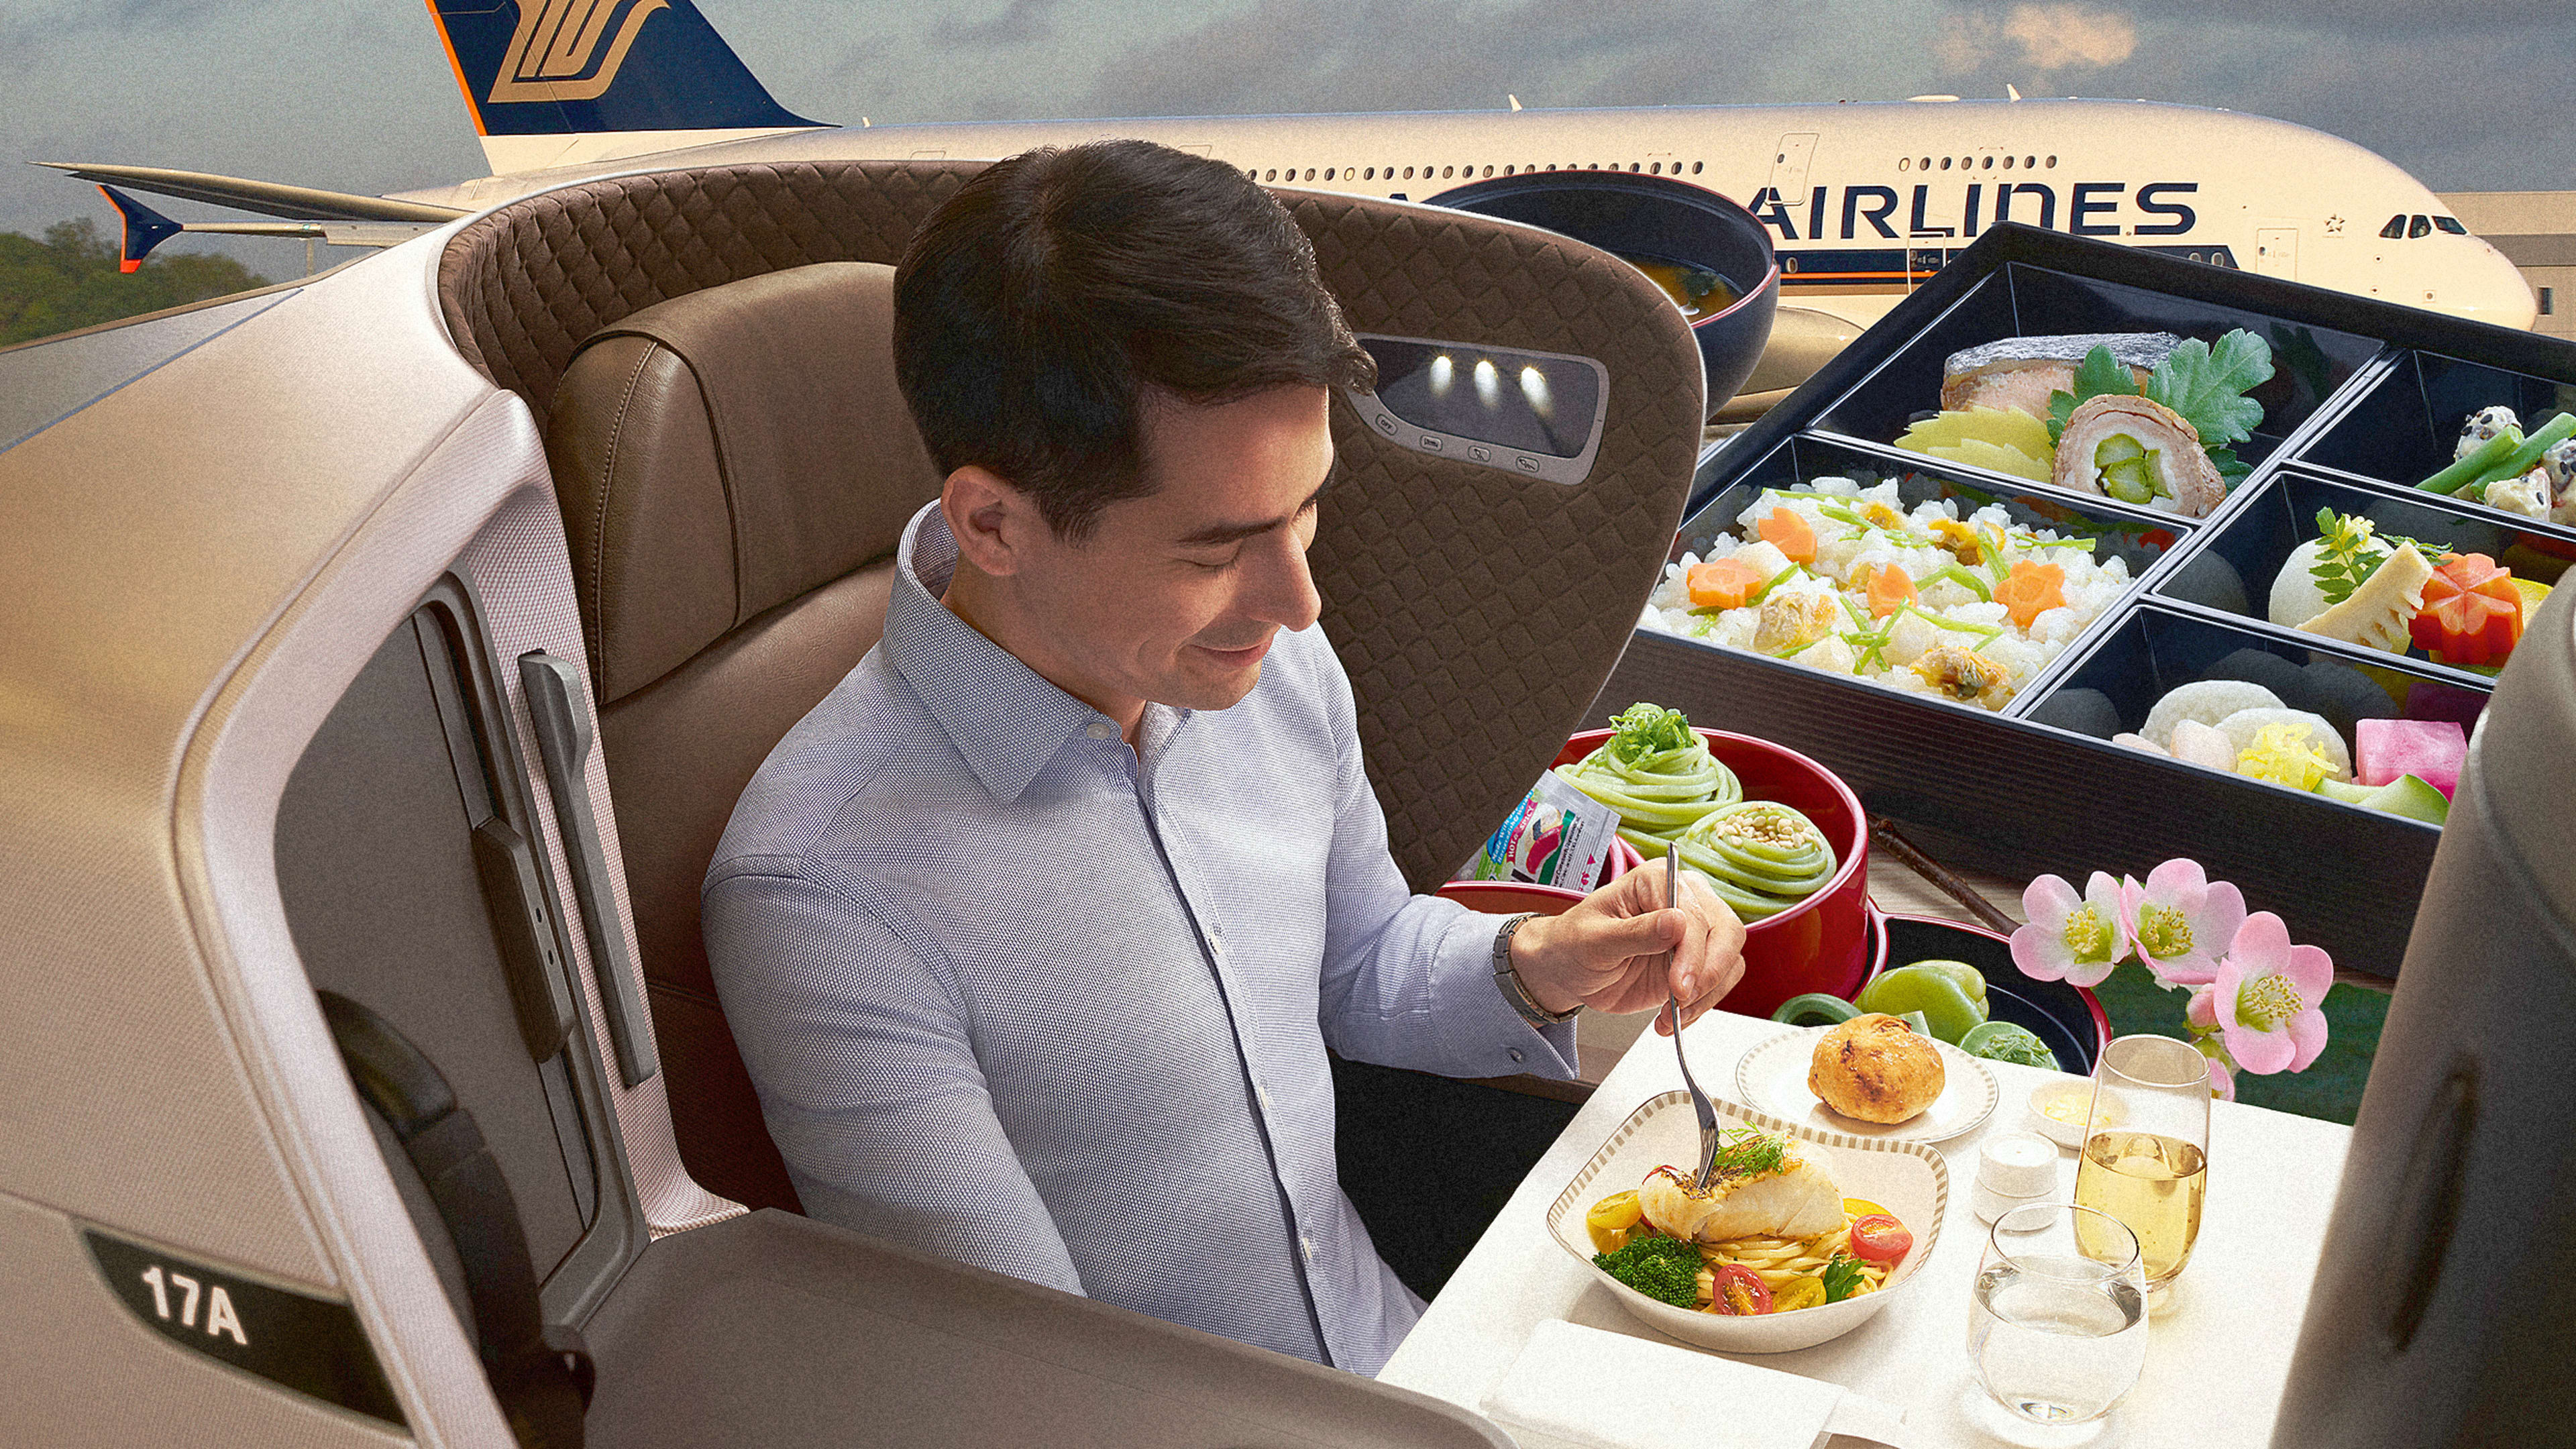 Singapore Airlines is turning its planes into pop-up restaurants